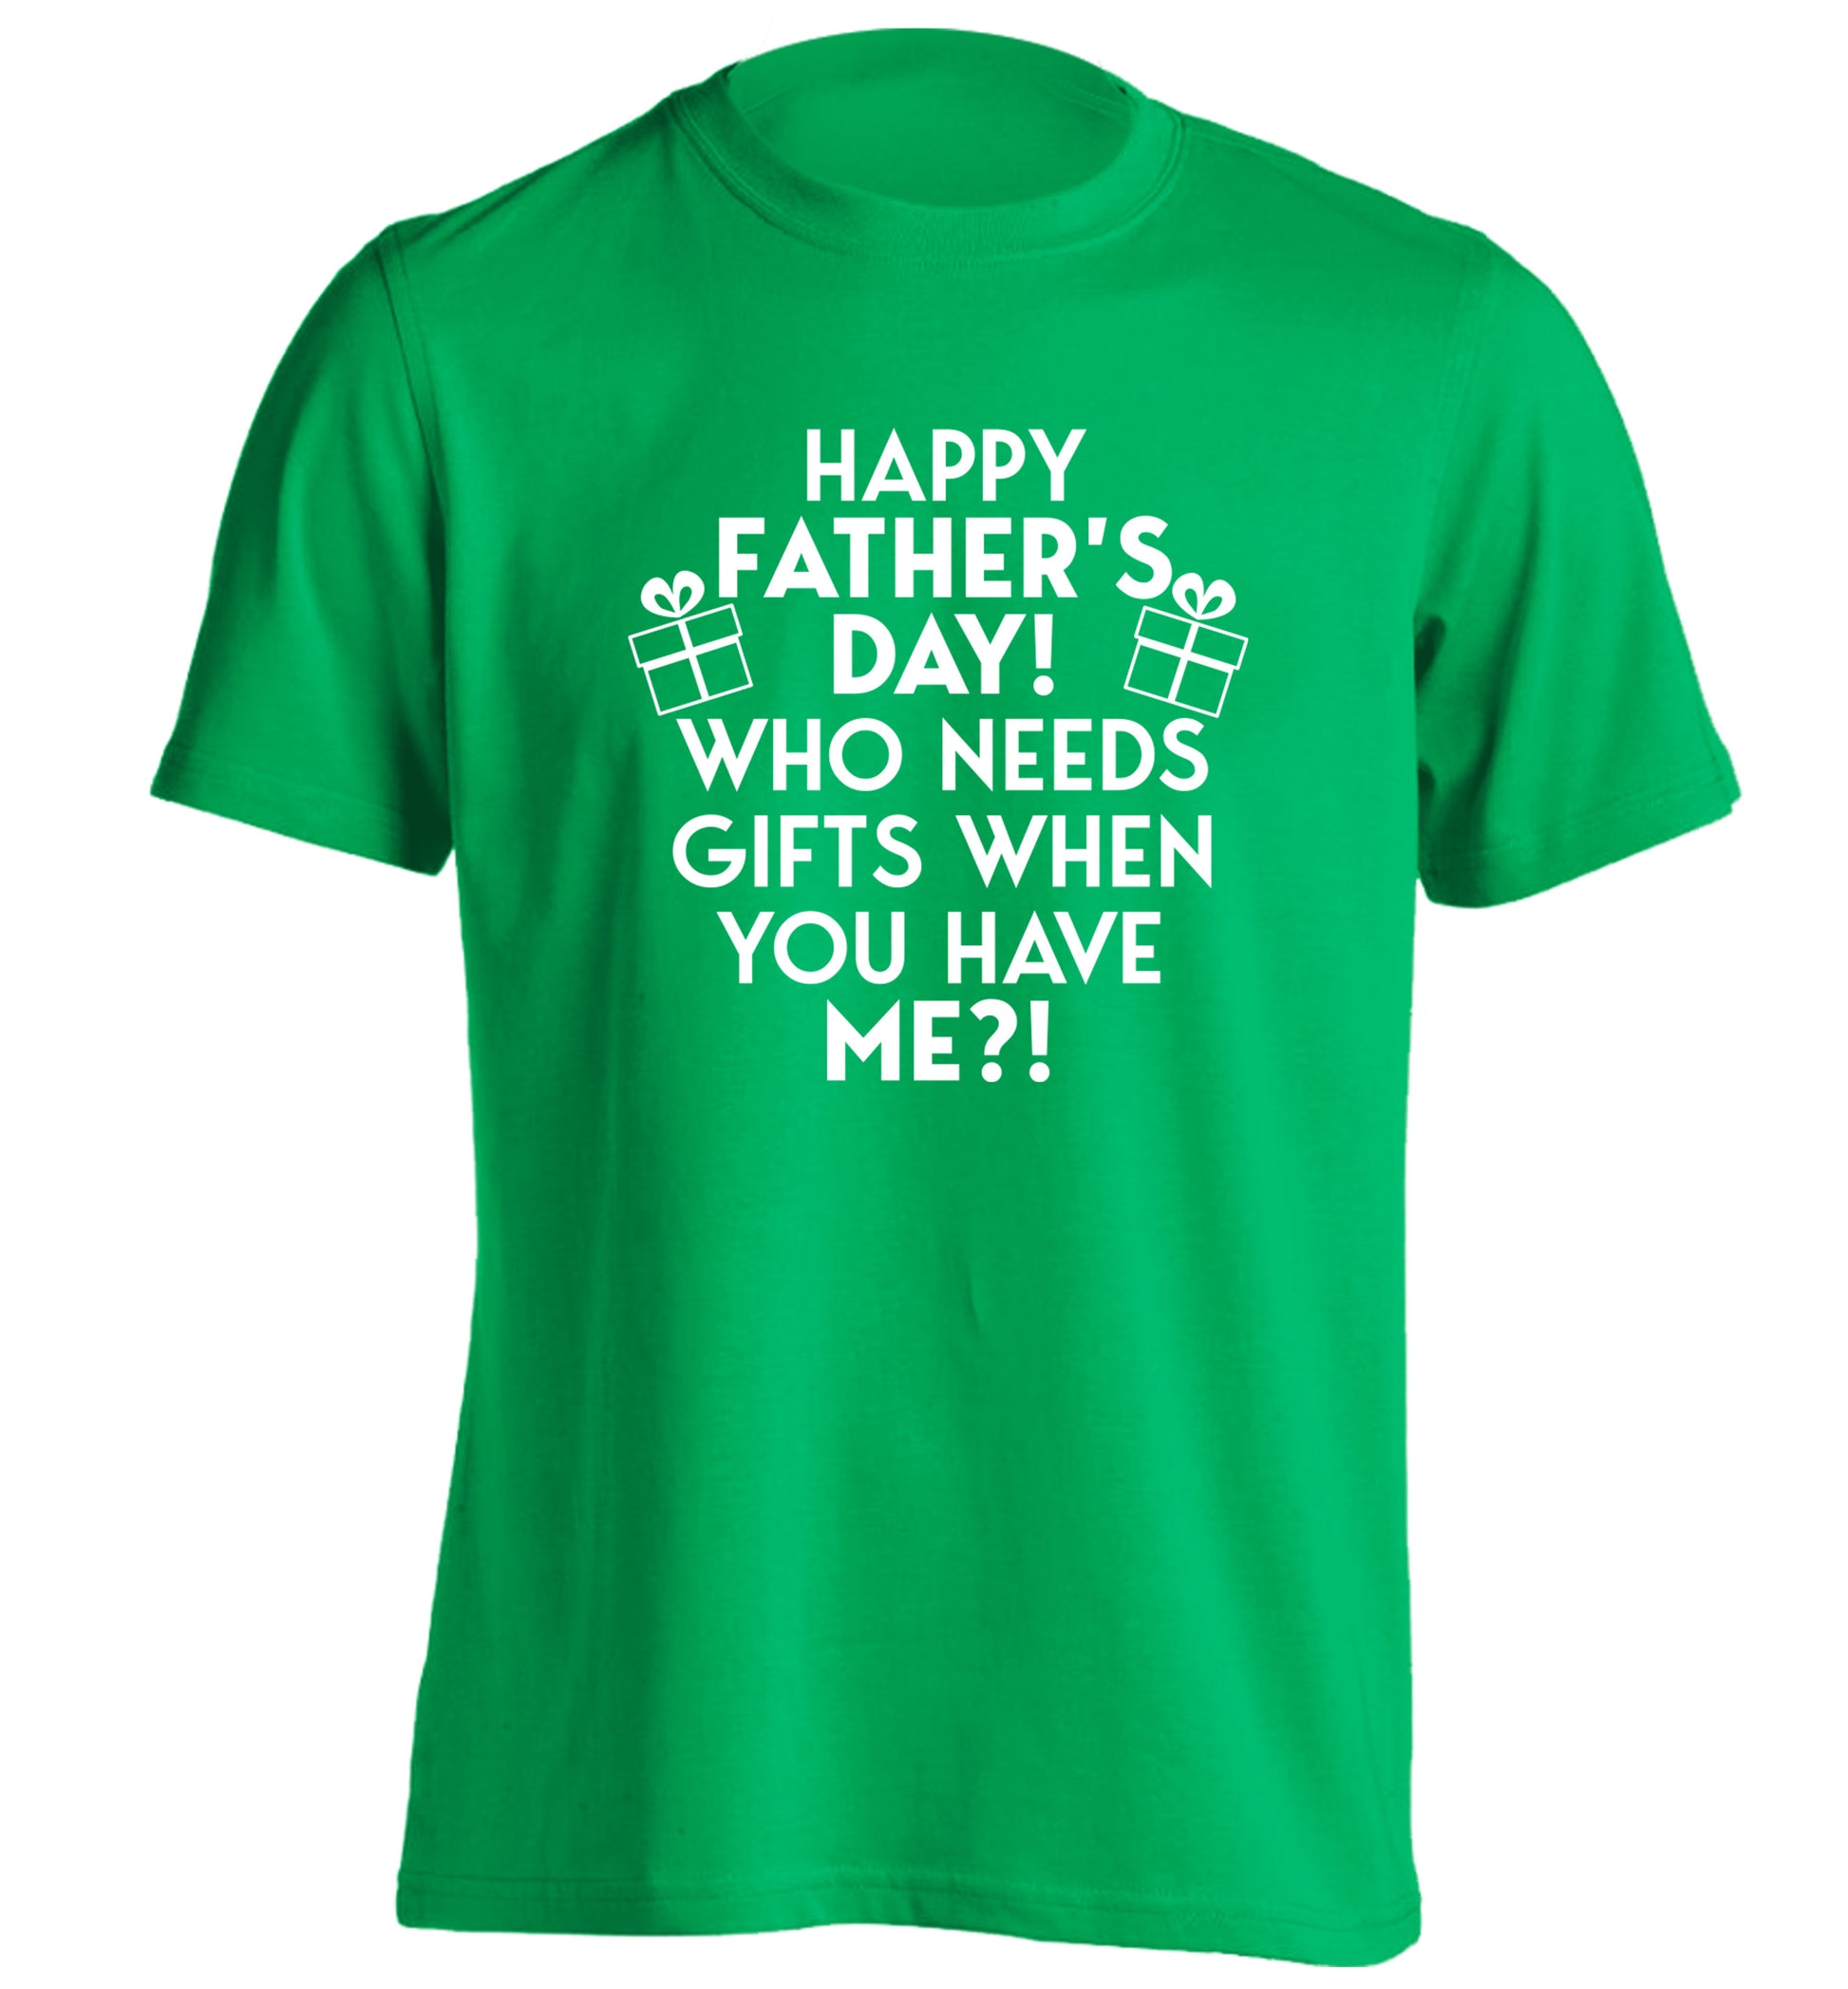 Happy Father's day, who needs a present when you have me adults unisex green Tshirt 2XL